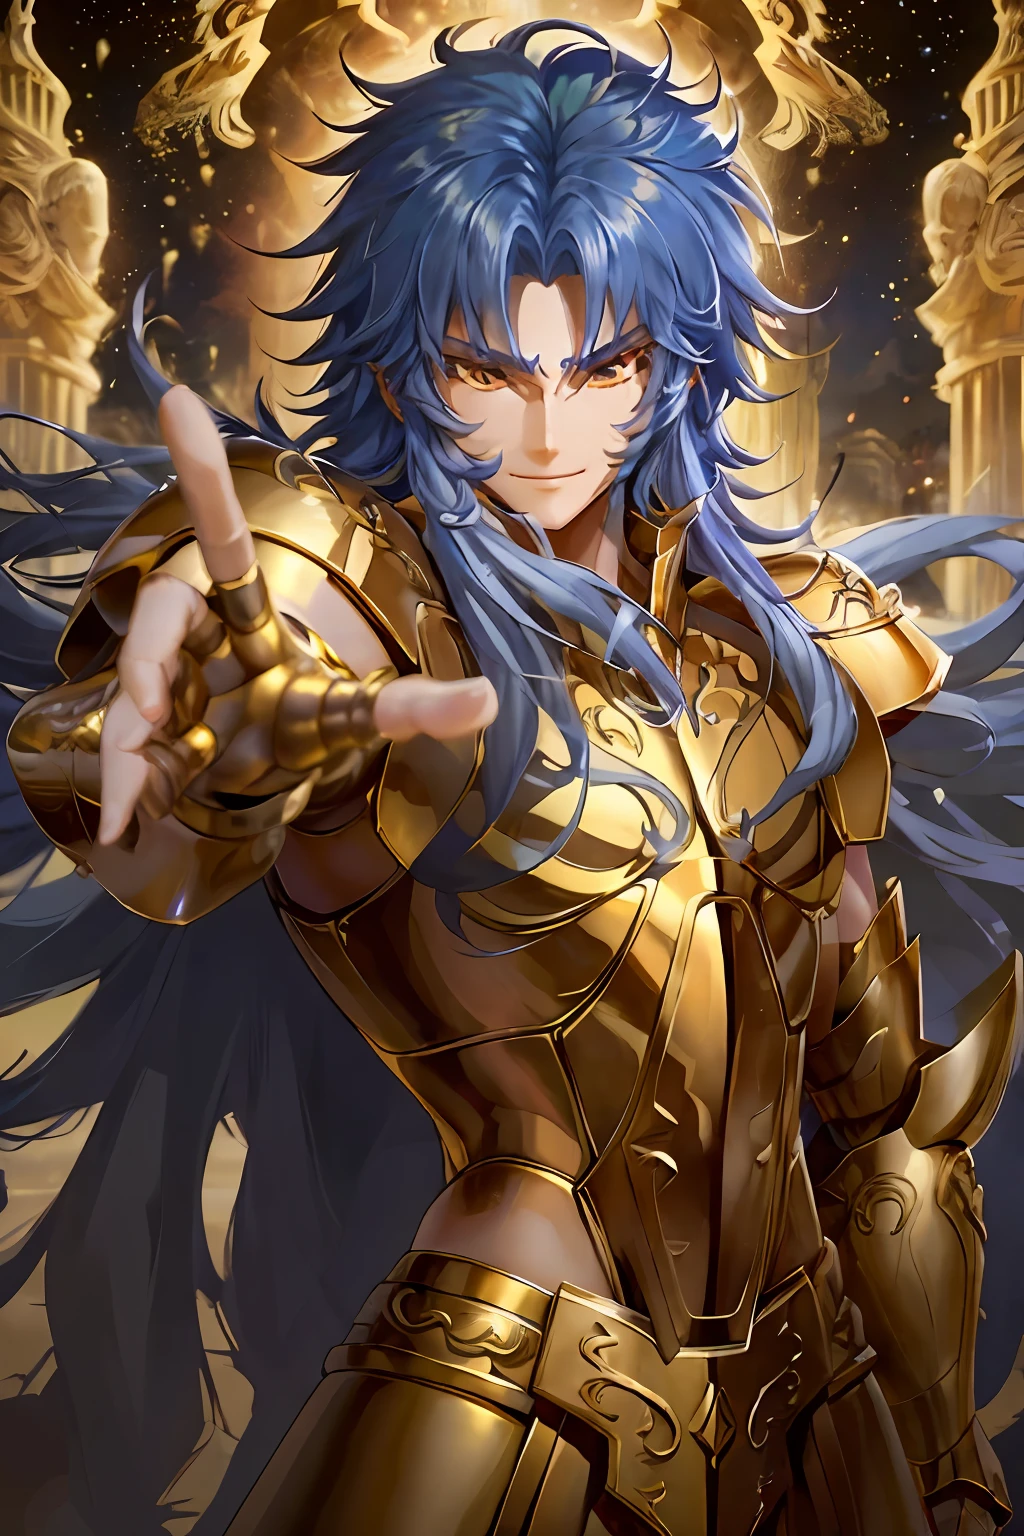 tmasterpiece， realisticlying， ultra - detailed， Unity 8k Wallpapers，
Leo armor，
（（Libido boy，dynamicposes，（Leo armor，Golden armor，vivd colour），lusciouslips，（blue hairs），（black in color|with brown eye），（Lots of detail on the face：1.1），（Medium Locs hairstyle：1.1）|，Thin lips，grin face，delicate hand，delicate finger）），serious，
Henan Big Buddha，very highly detailed background，
Fascinating sports，captivating visuals，
Seamless integration，Engaging storytelling